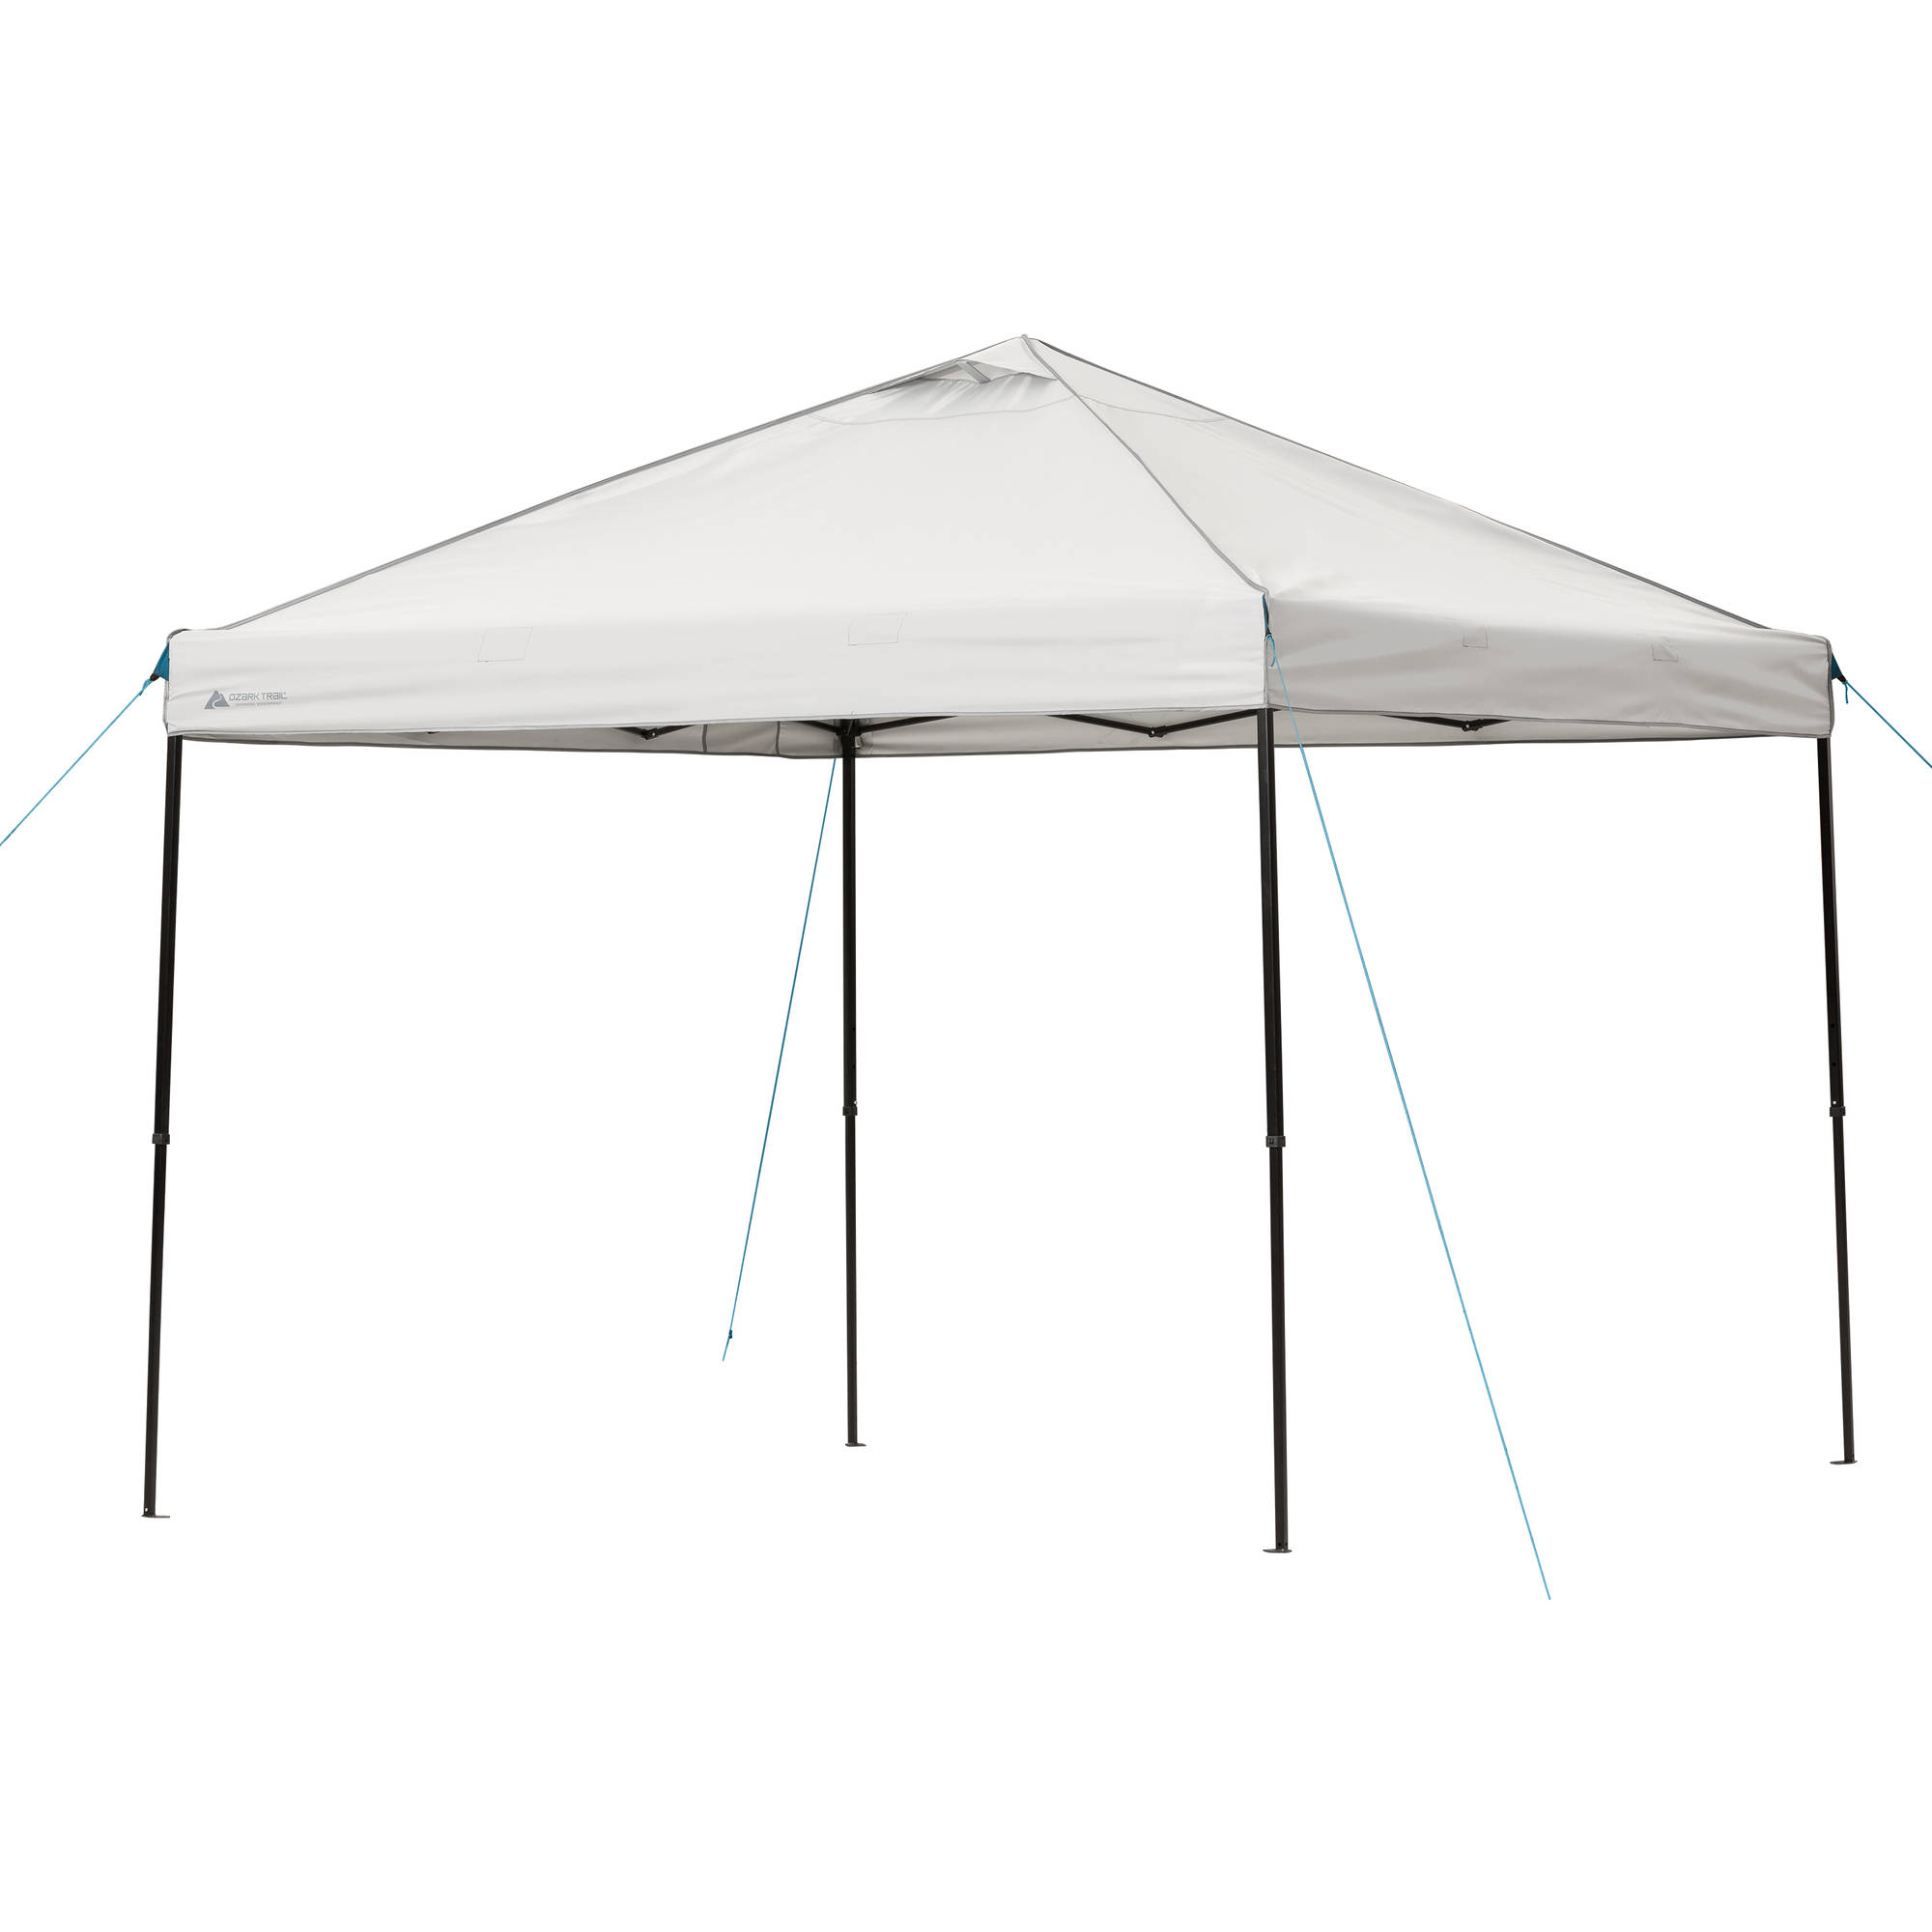 Ozark Trail 10' x 10' Instant Canopy - image 1 of 8